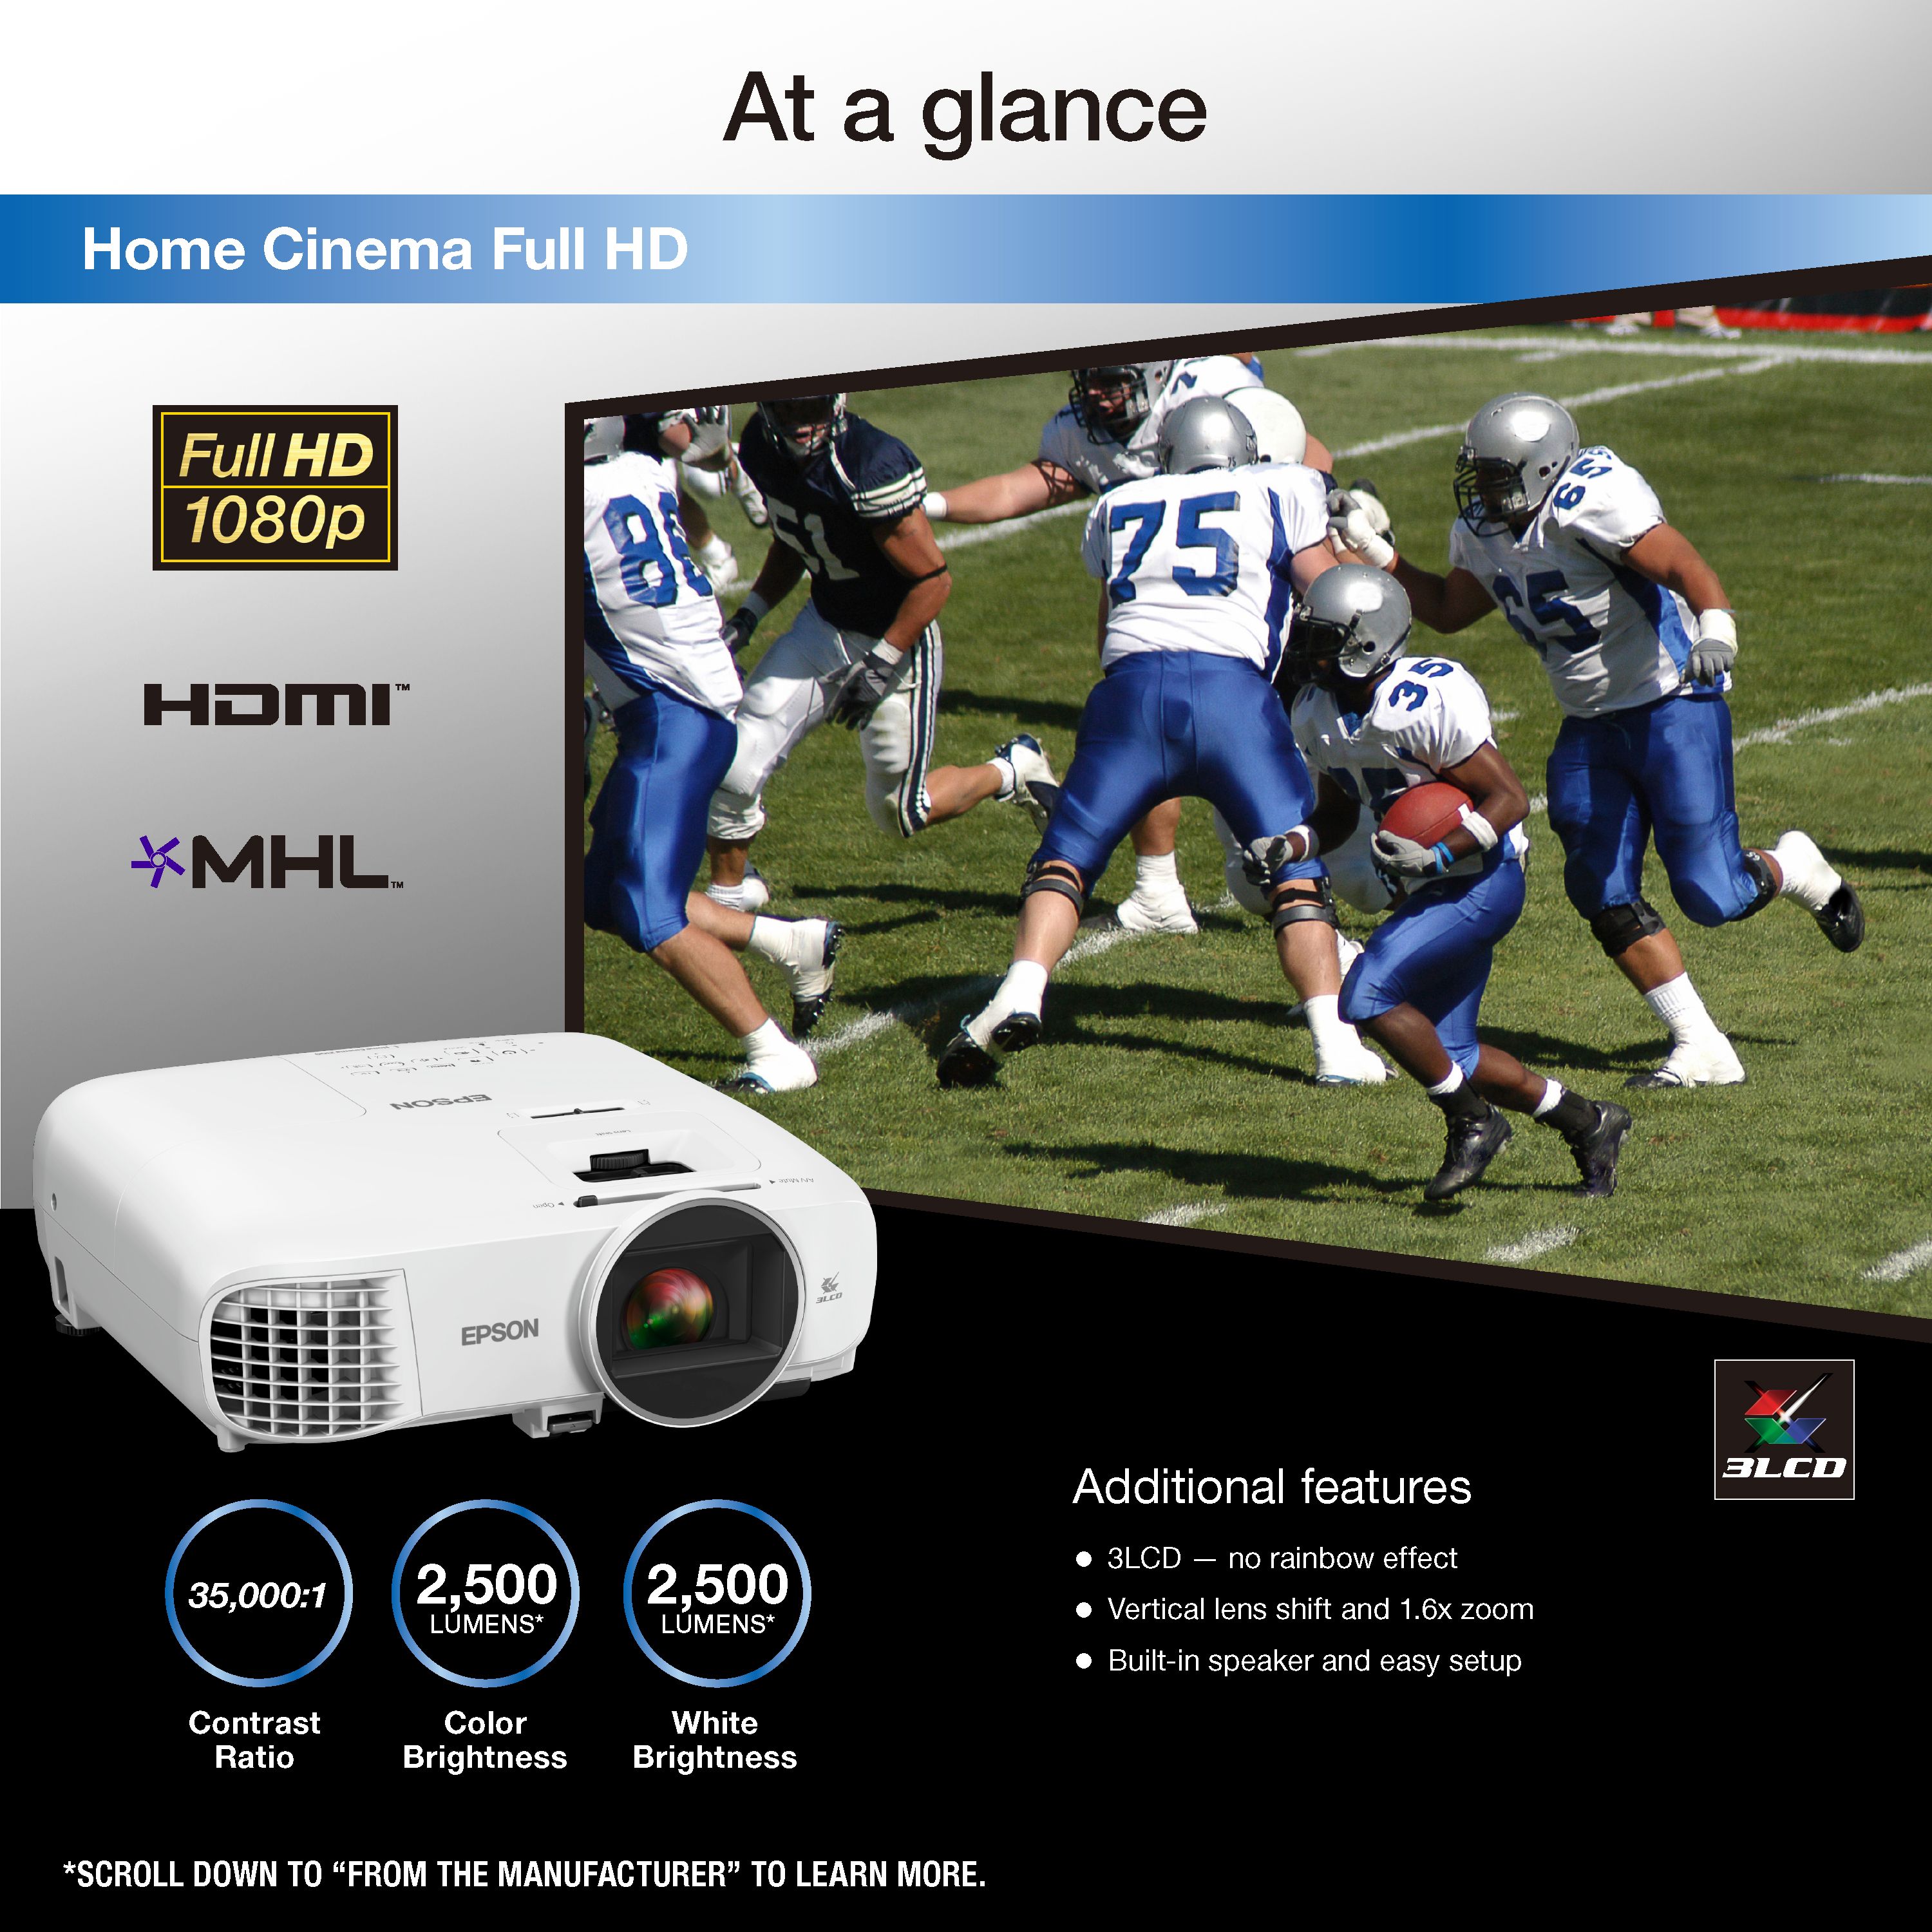 Epson Home Cinema Full HD, 1080p, 2,500 lumens color brightness (color light output), 2,500 lumens white brightness (white light output), 2x HDMI (1 MHL), 3LCD projector - image 3 of 6